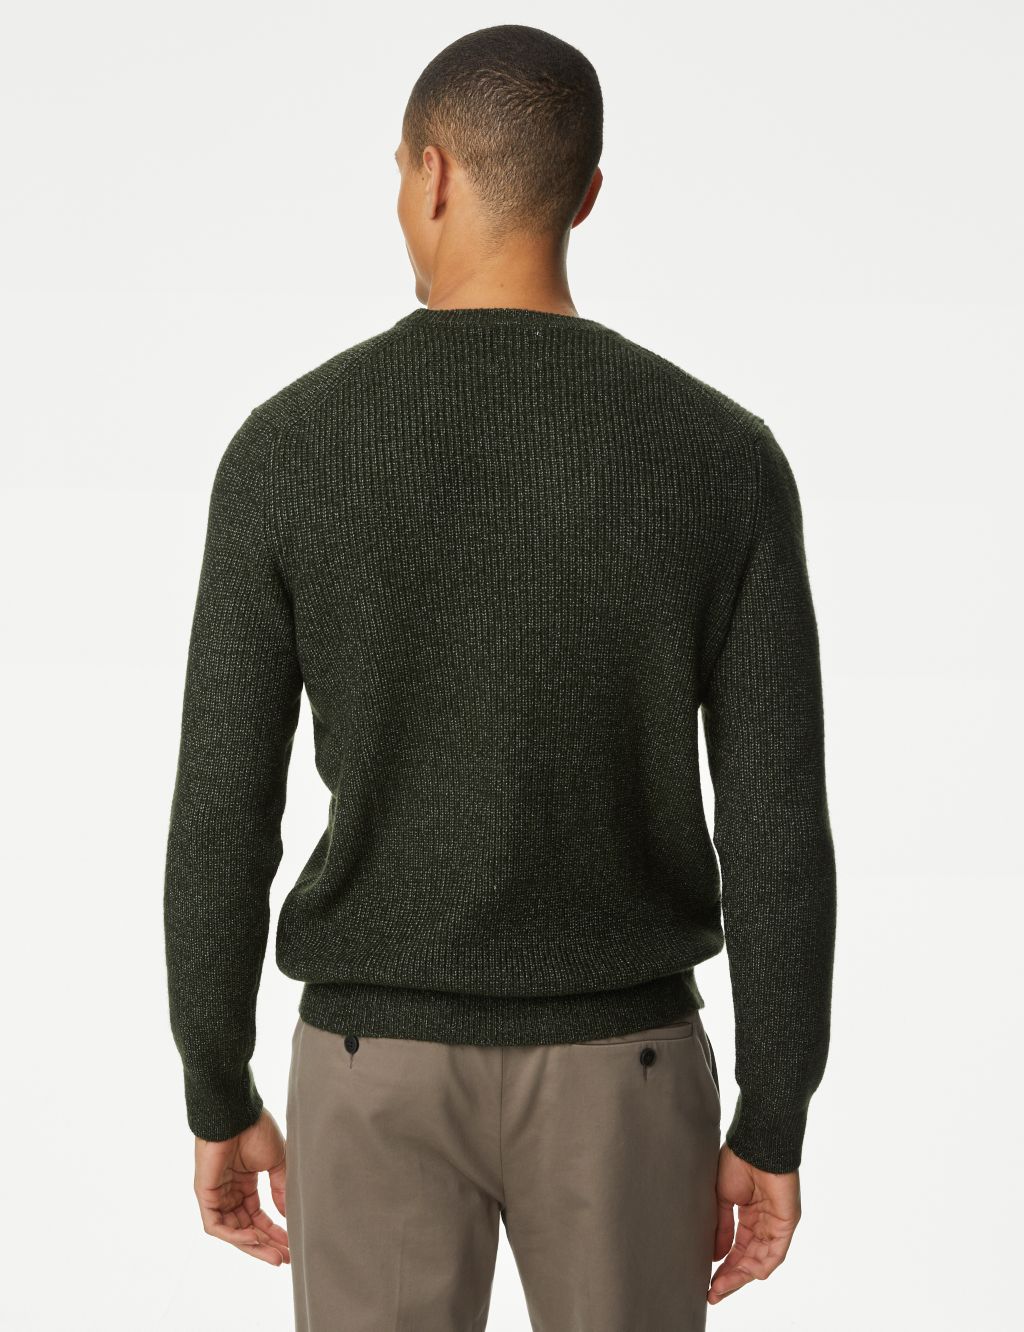 Supersoft Chunky Crew Neck Jumper image 5